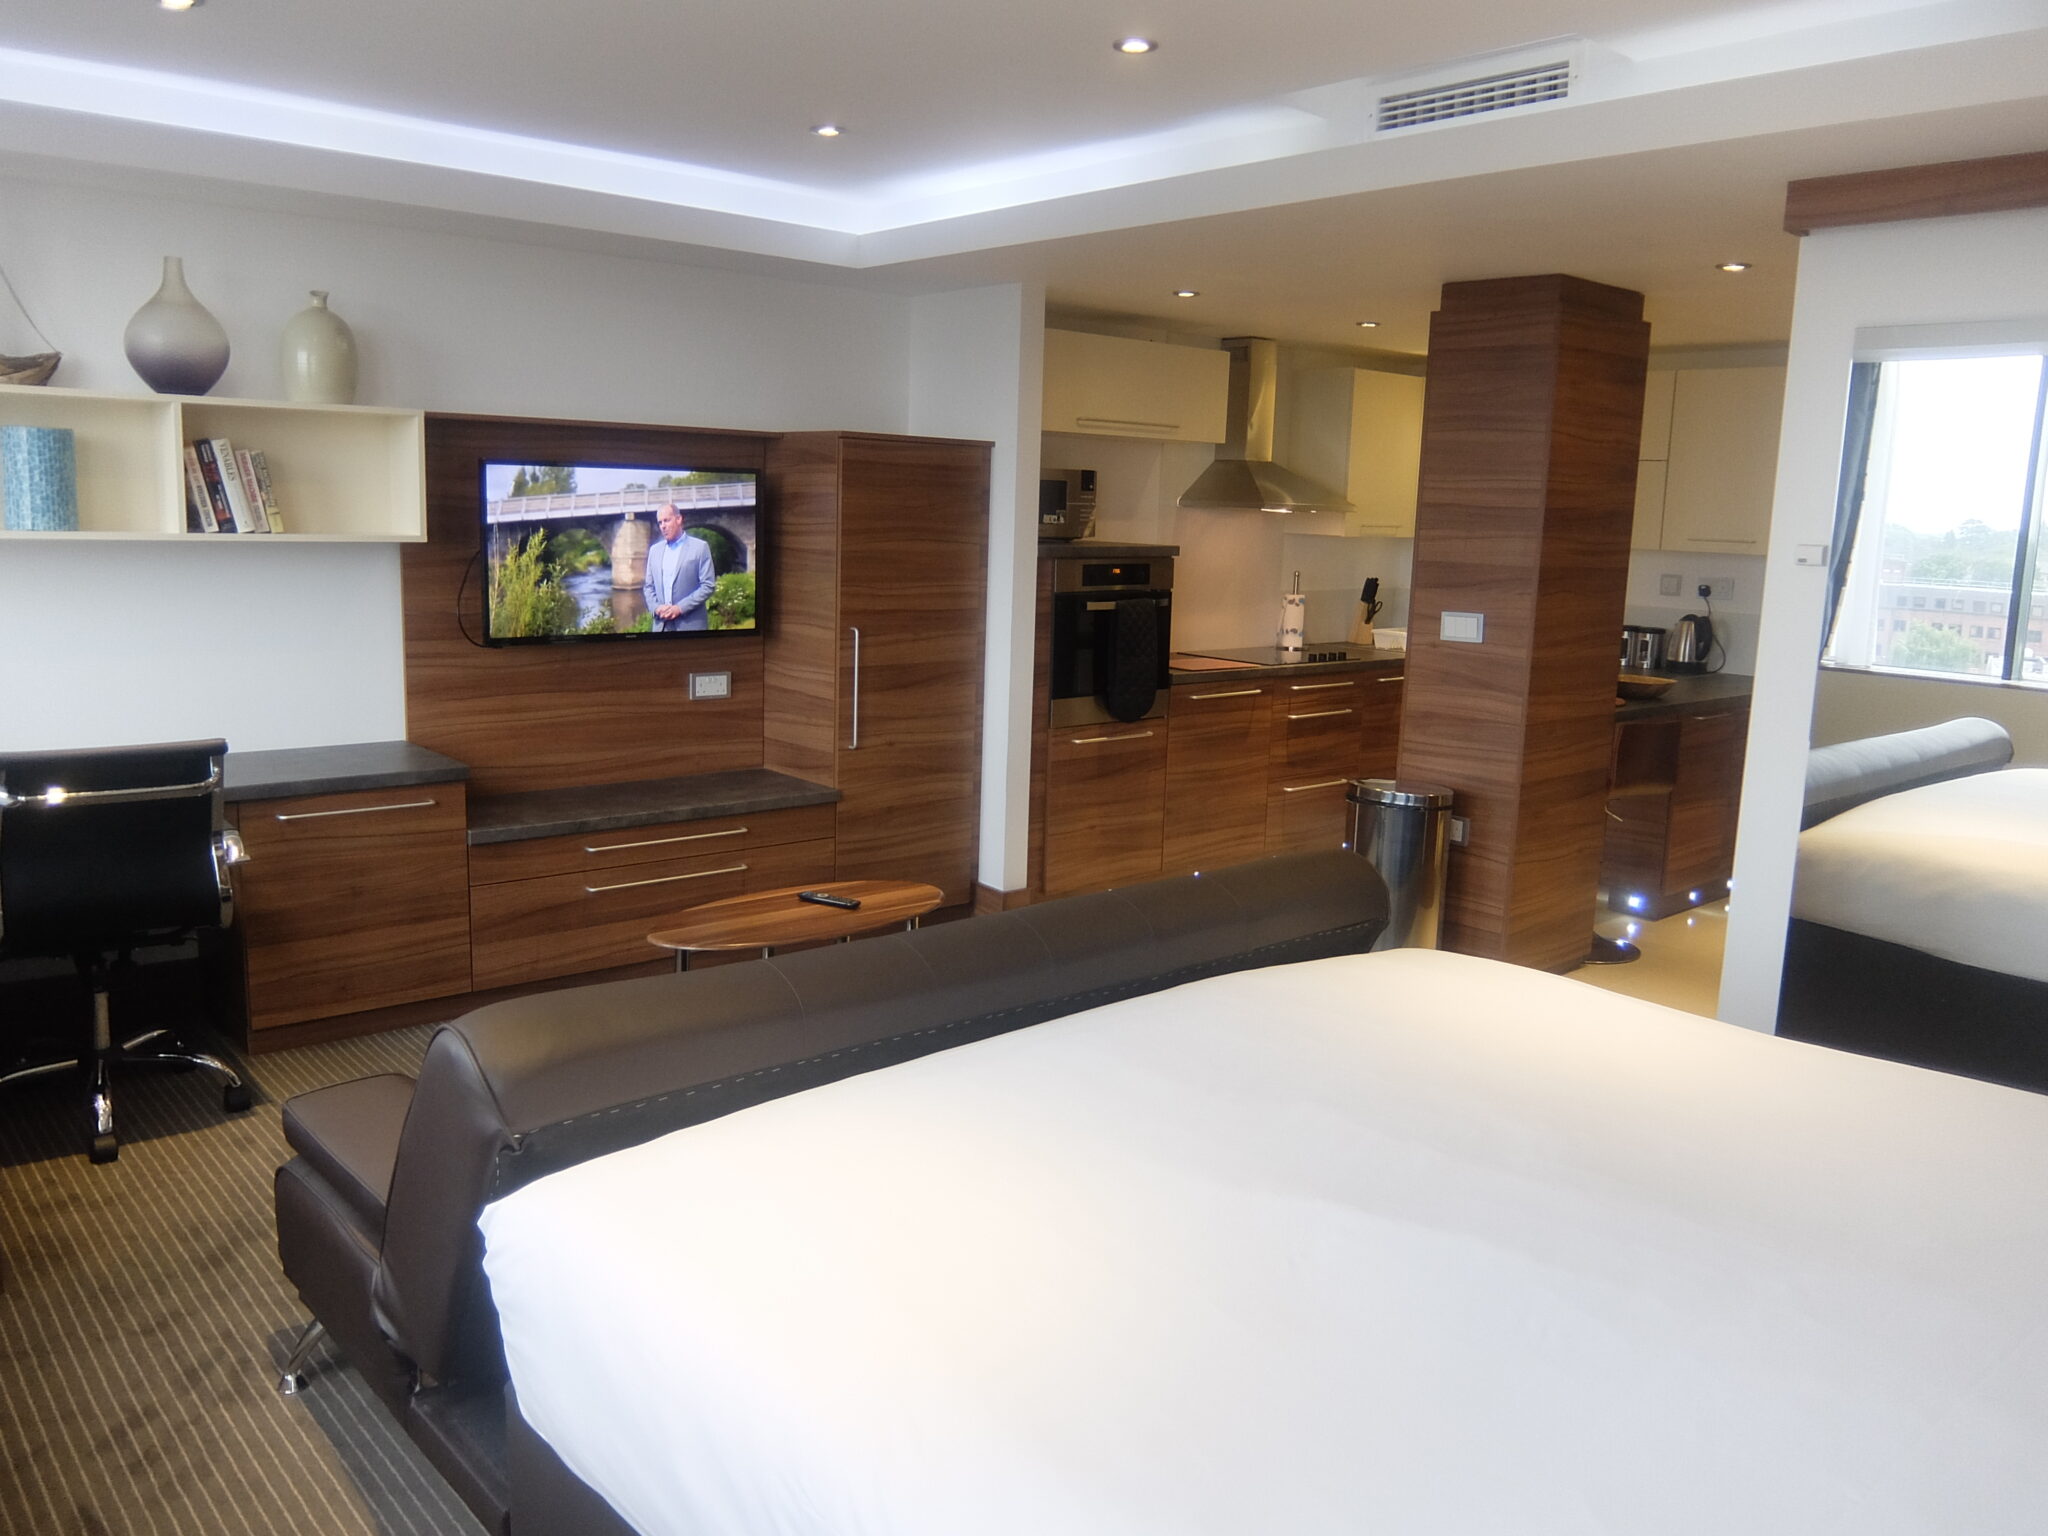 Wilmington Close Apartments - West London Serviced Apartments - Watford | Urban Stay